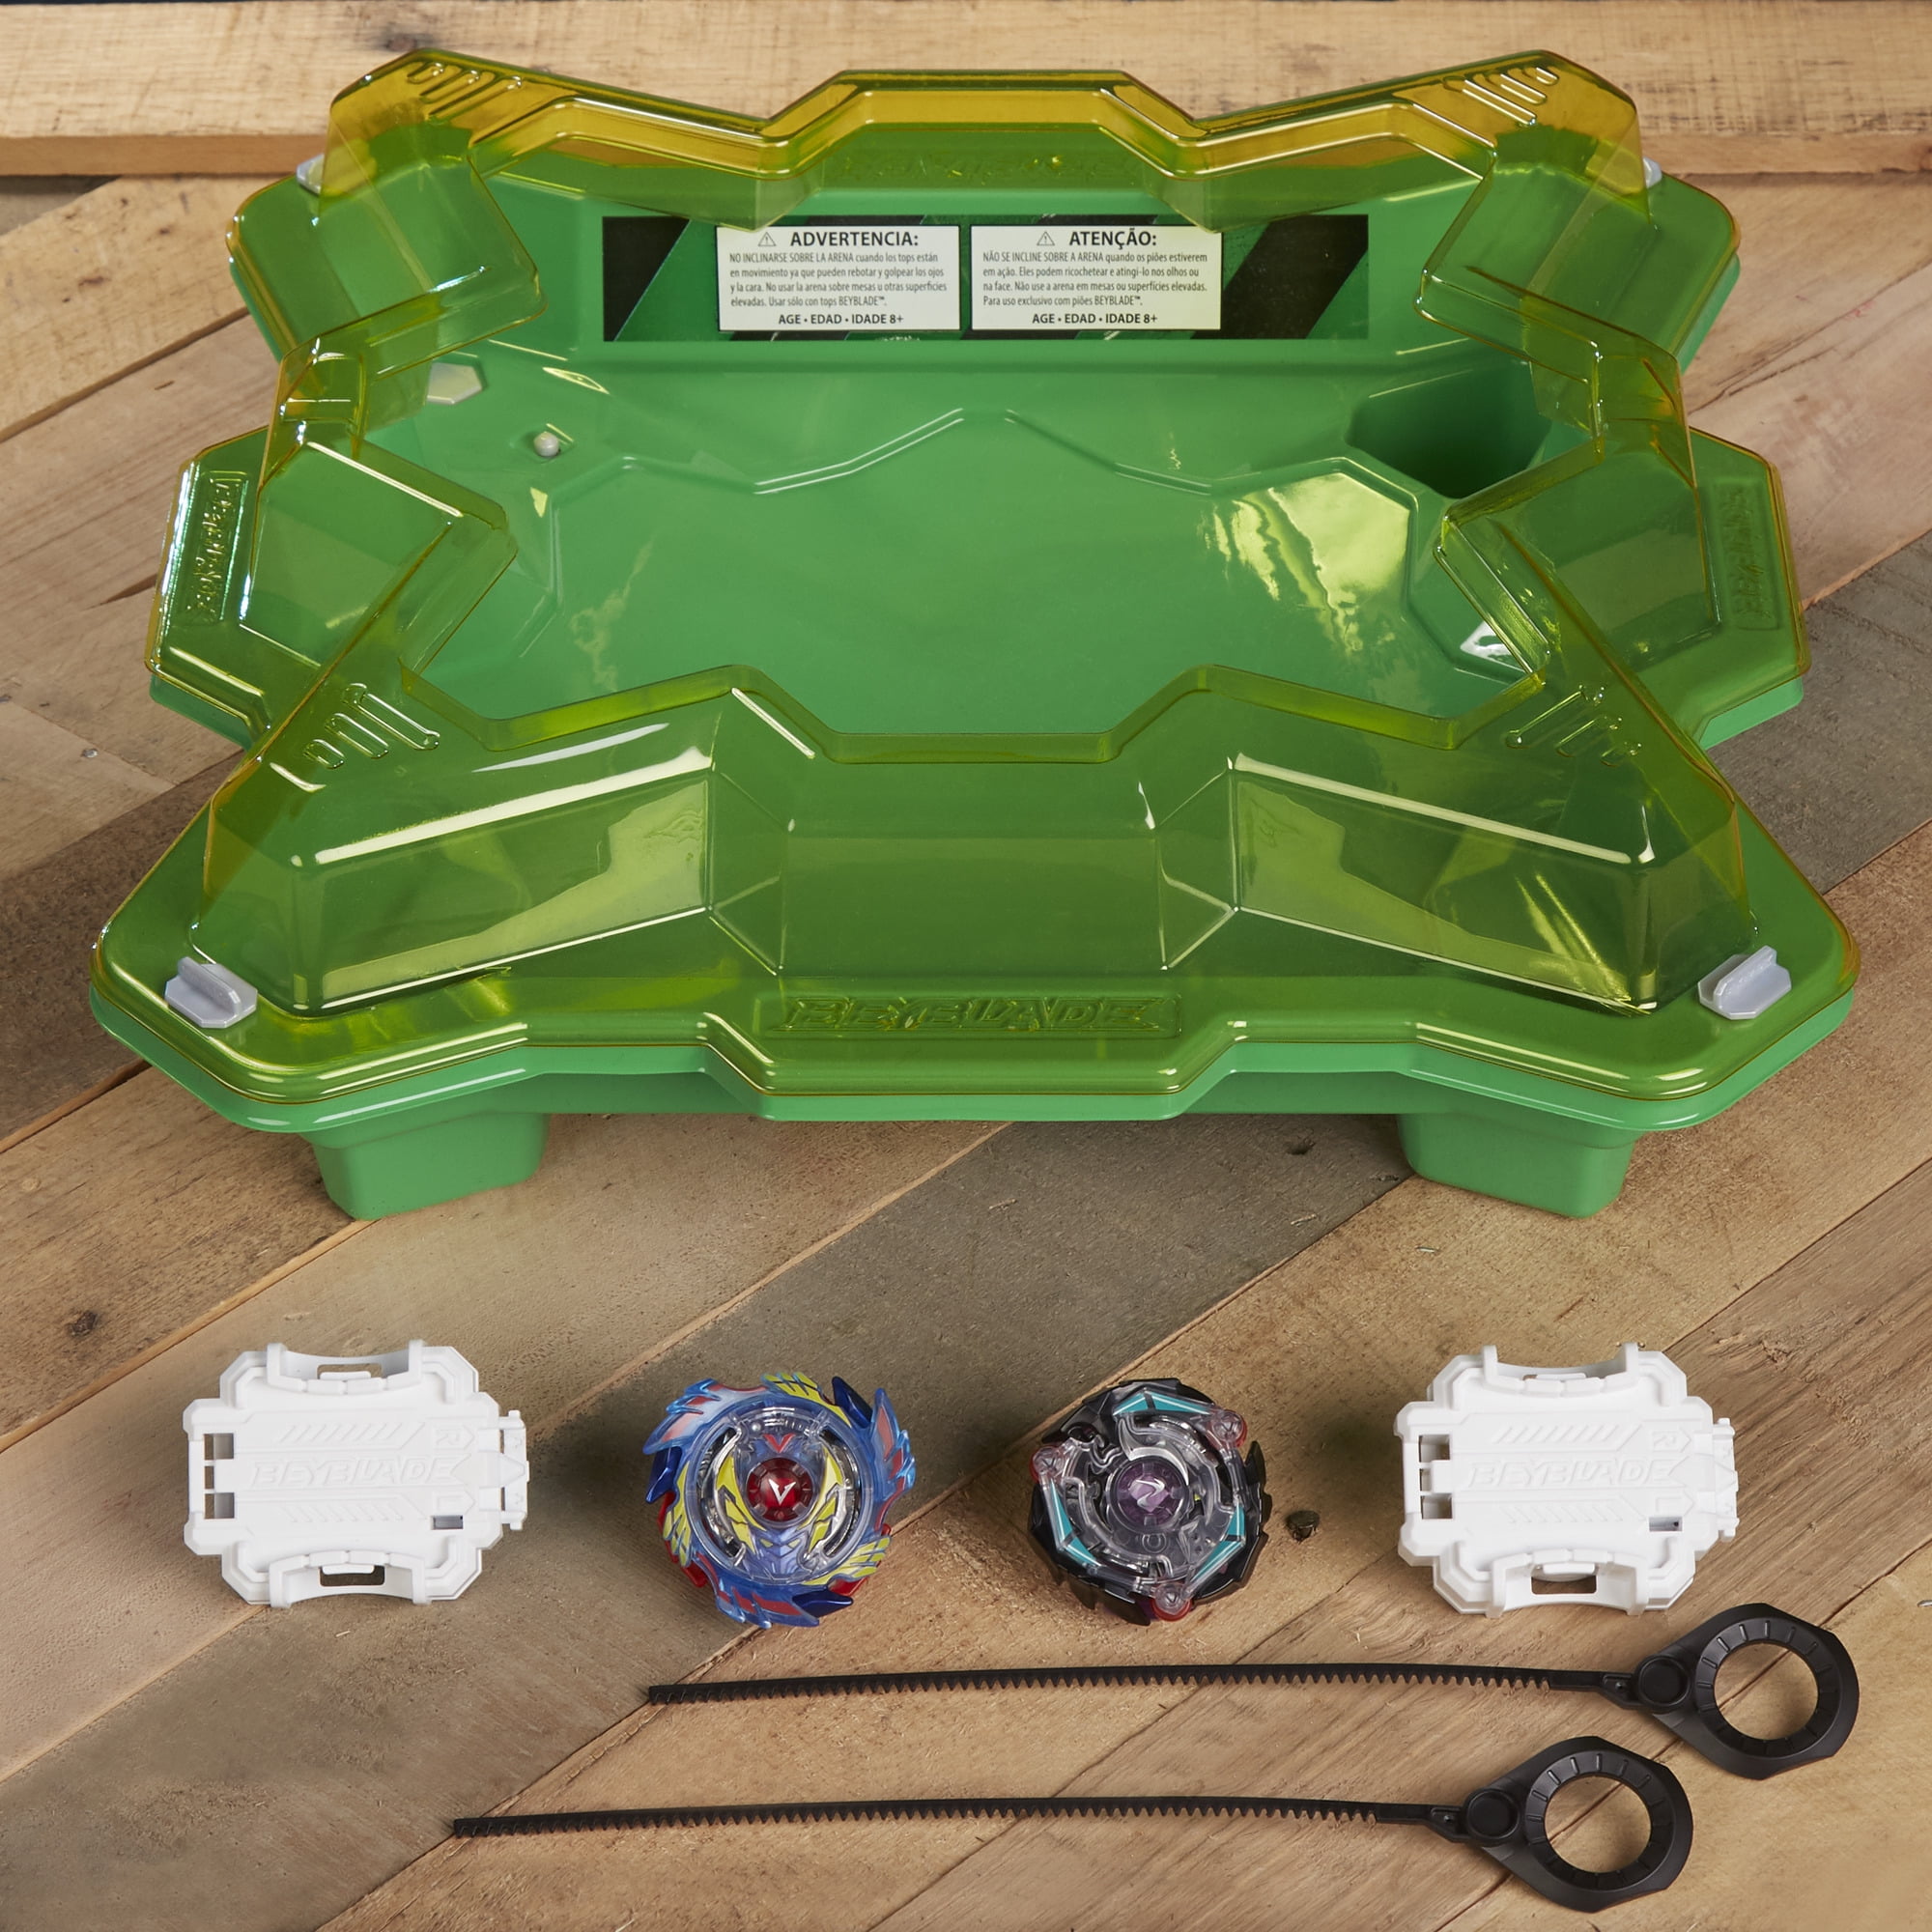 Beyblade Collectible Toys for sale in Bowling Green, Kentucky